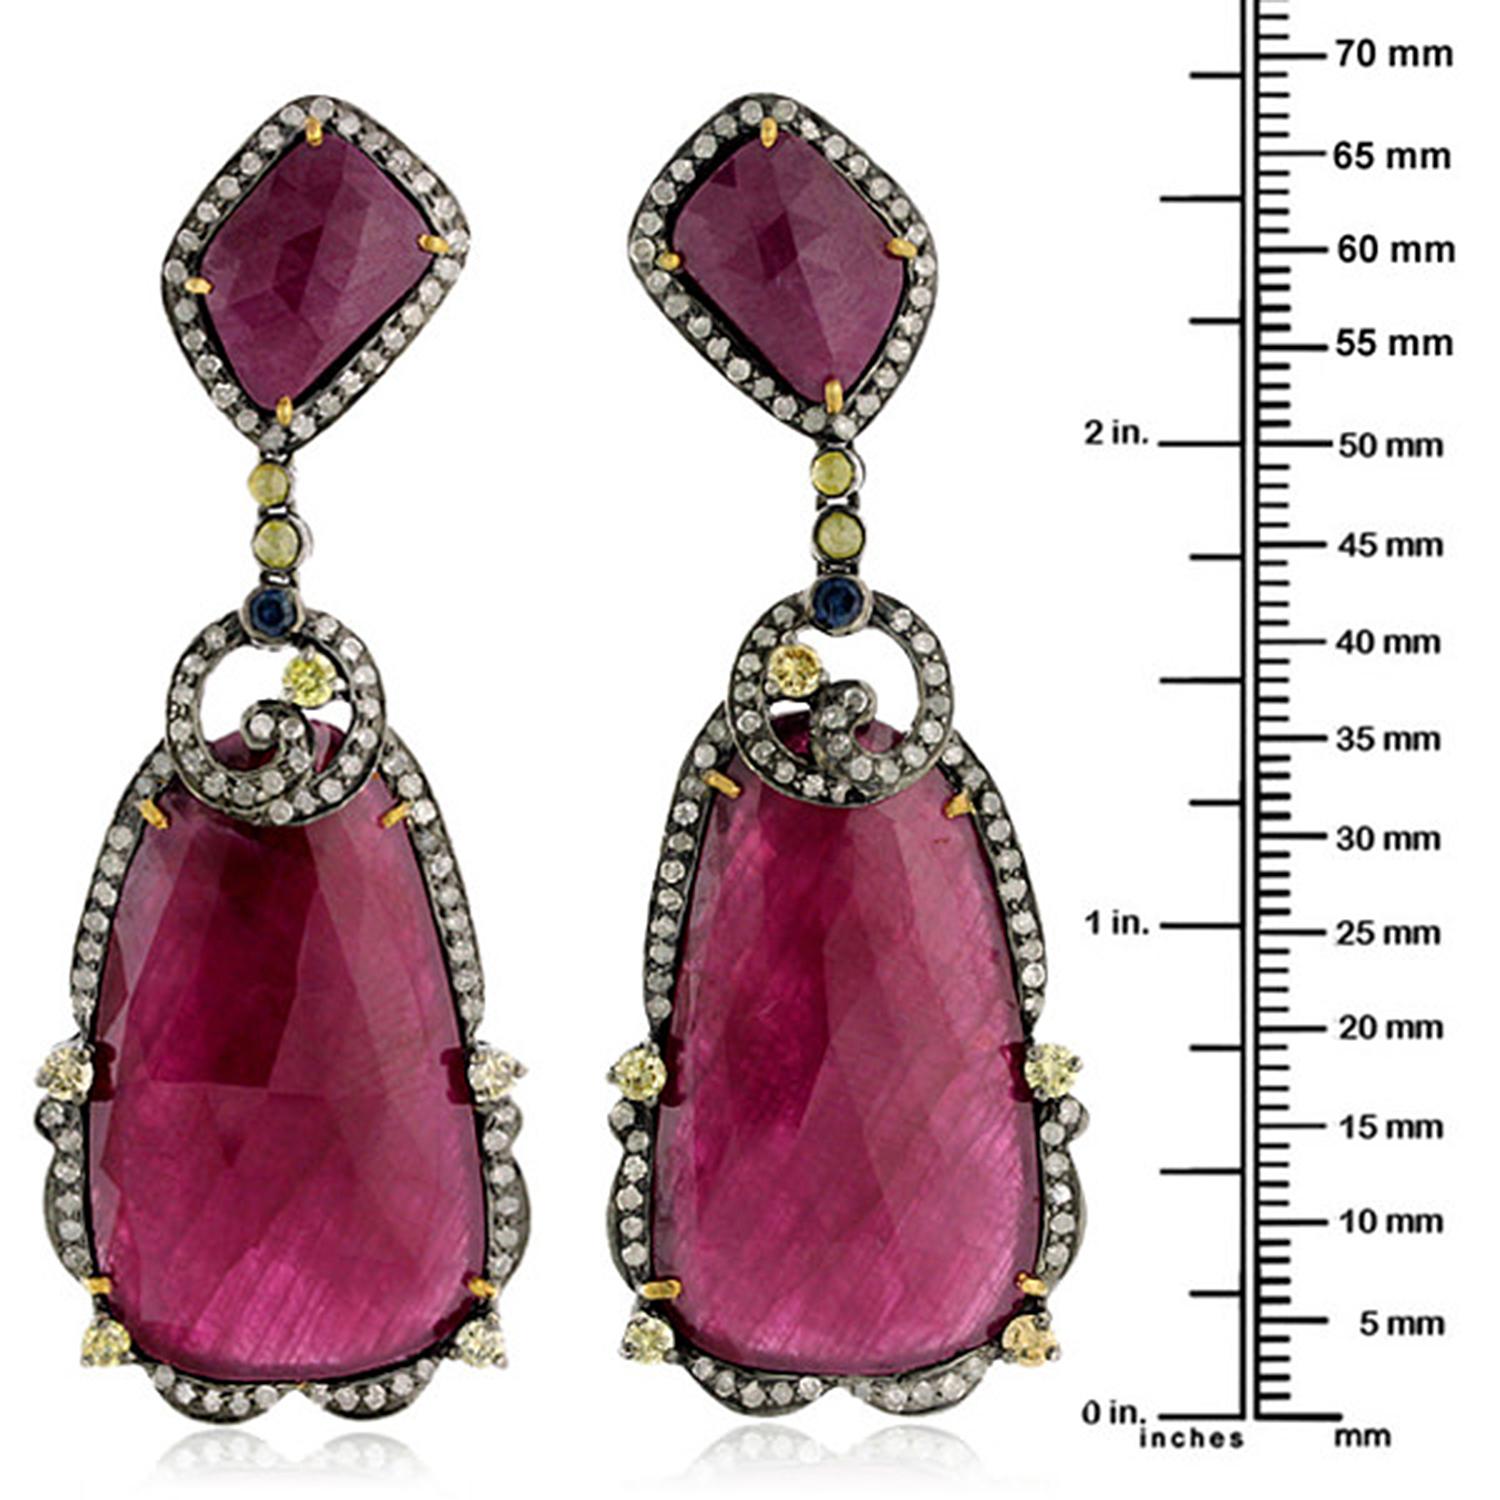 Mixed Cut Sliced Ruby Earrings With Blue Sapphire & Pave Diamonds In 18k Gold & Silver For Sale